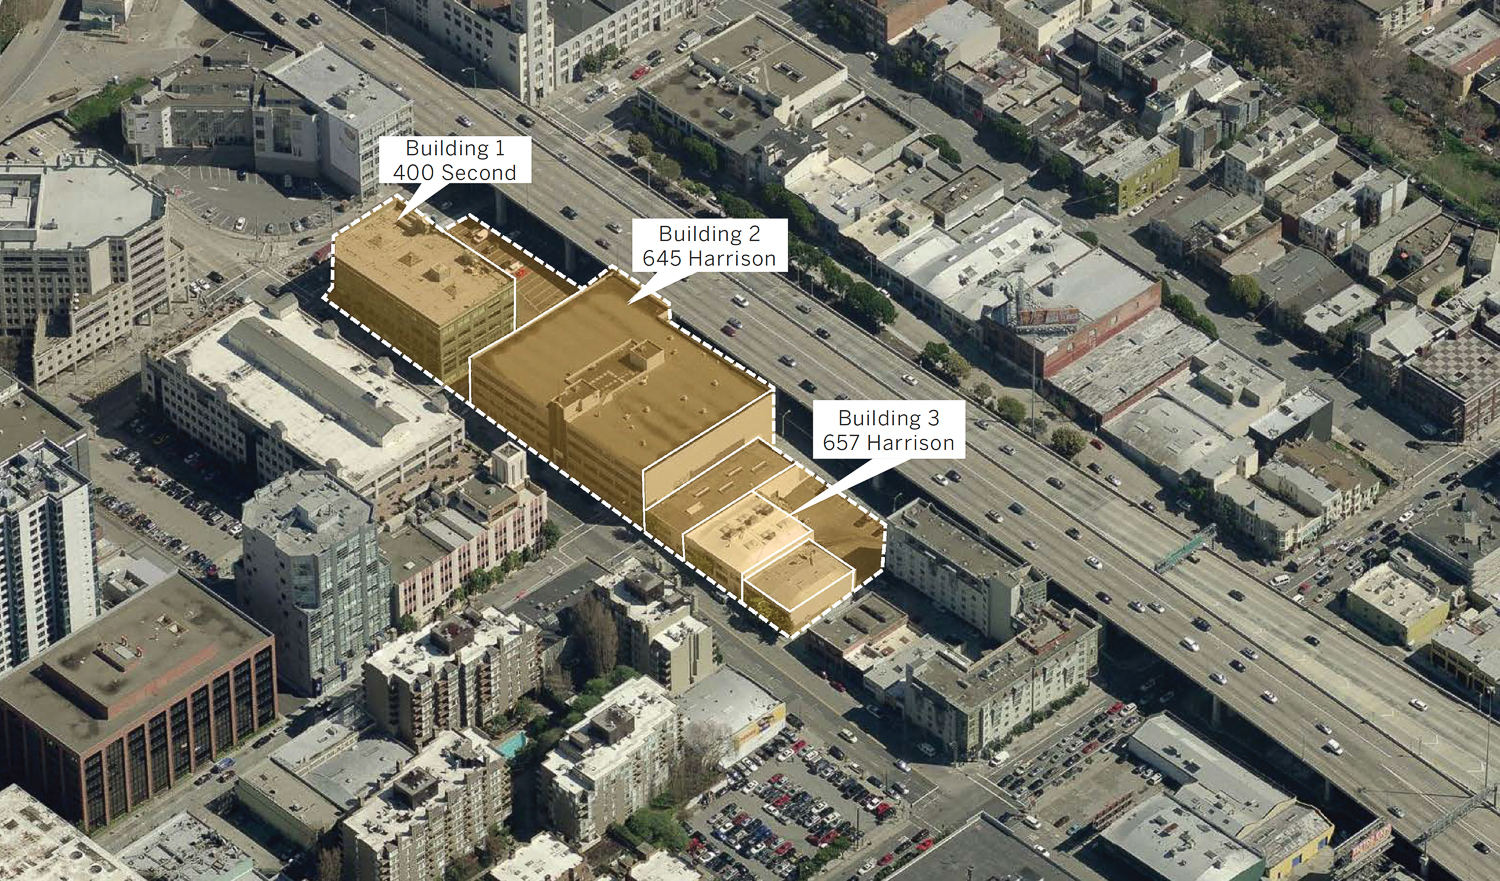 One Vassar property site, illustration published by the SF Planning Dept in the project plans